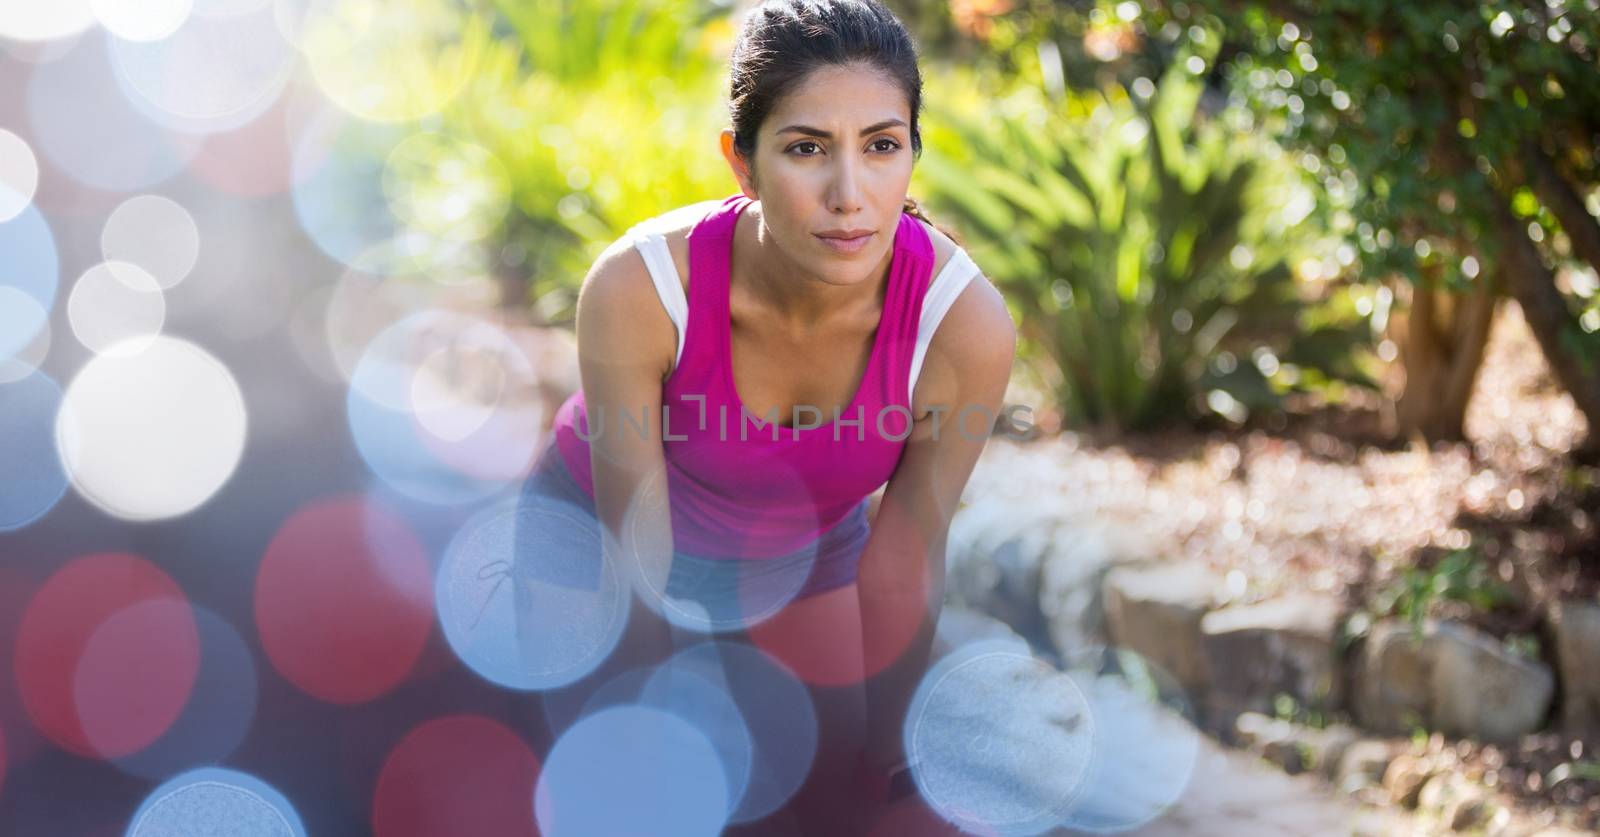 Digital composite of Young woman in sports wear outdoors